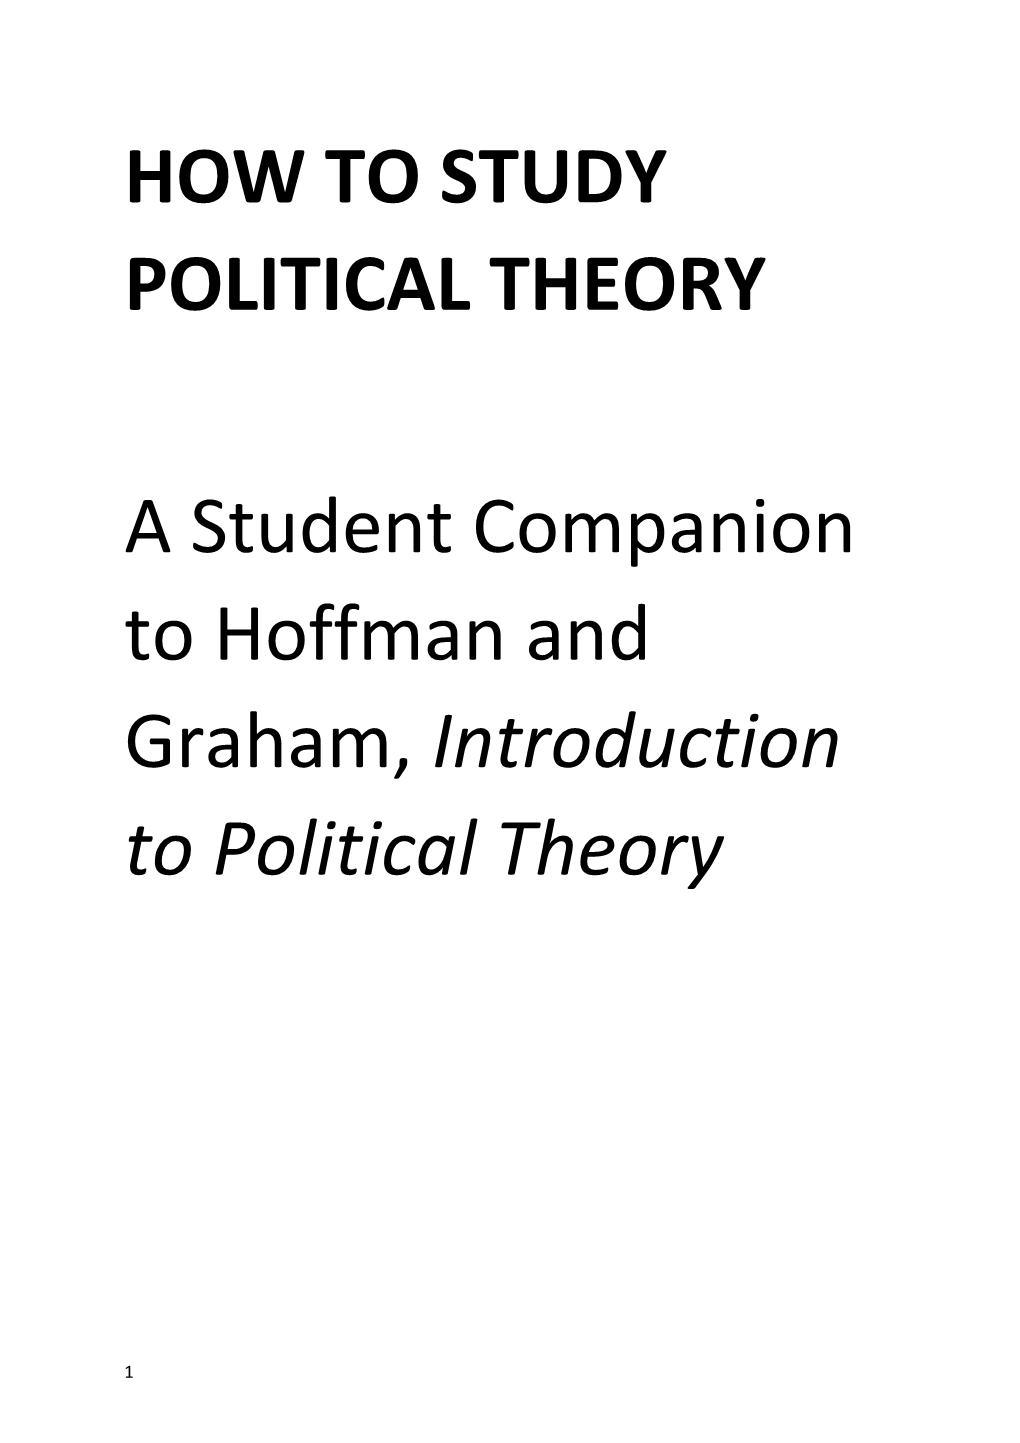 How to Study Political Theory